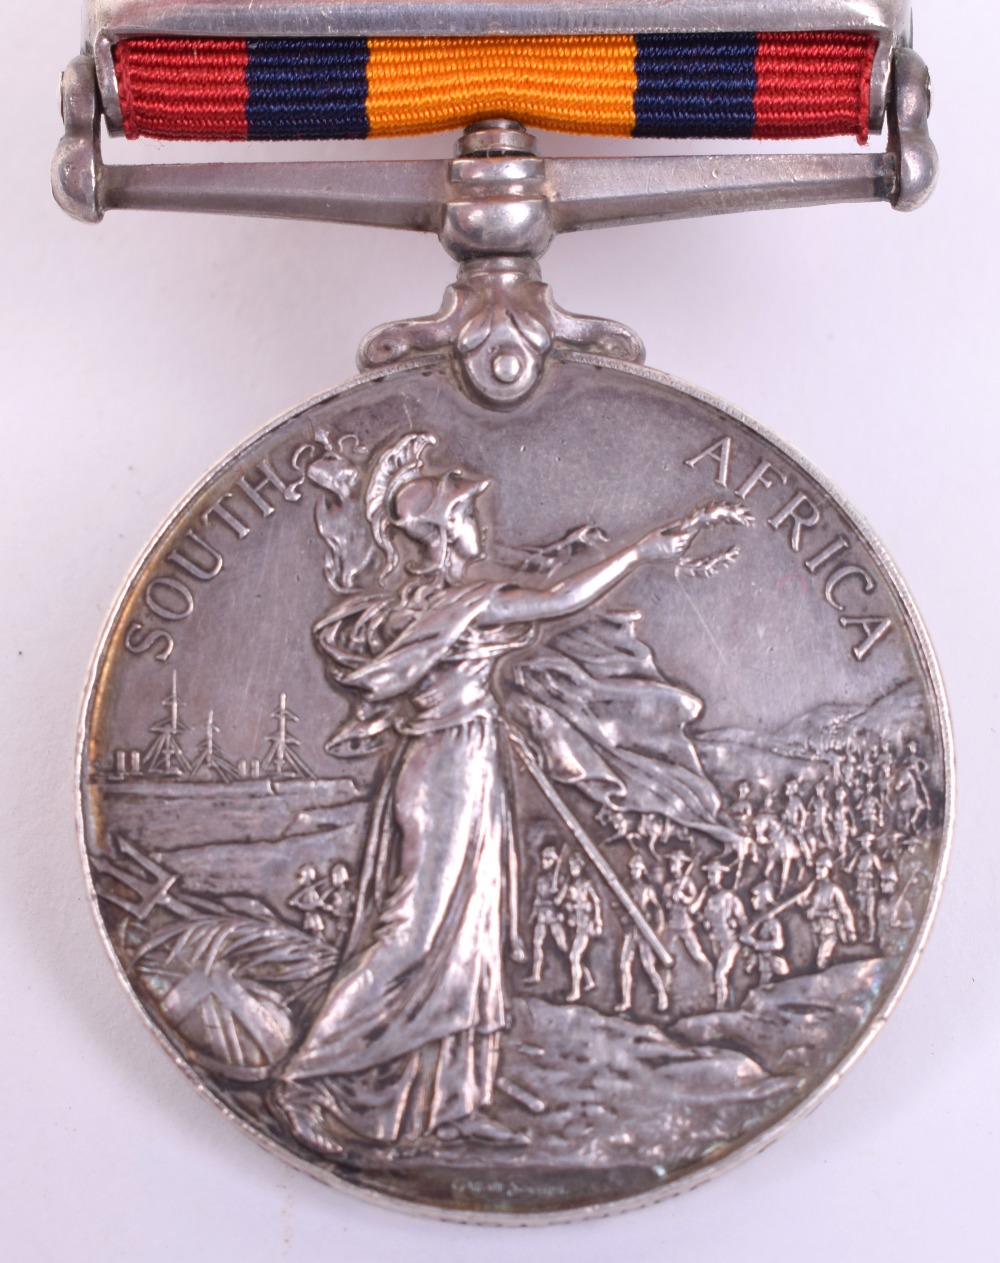 Boer War Queen’s South Africa Medal Seaforth Highlanders Mounted Infantry - Image 4 of 4